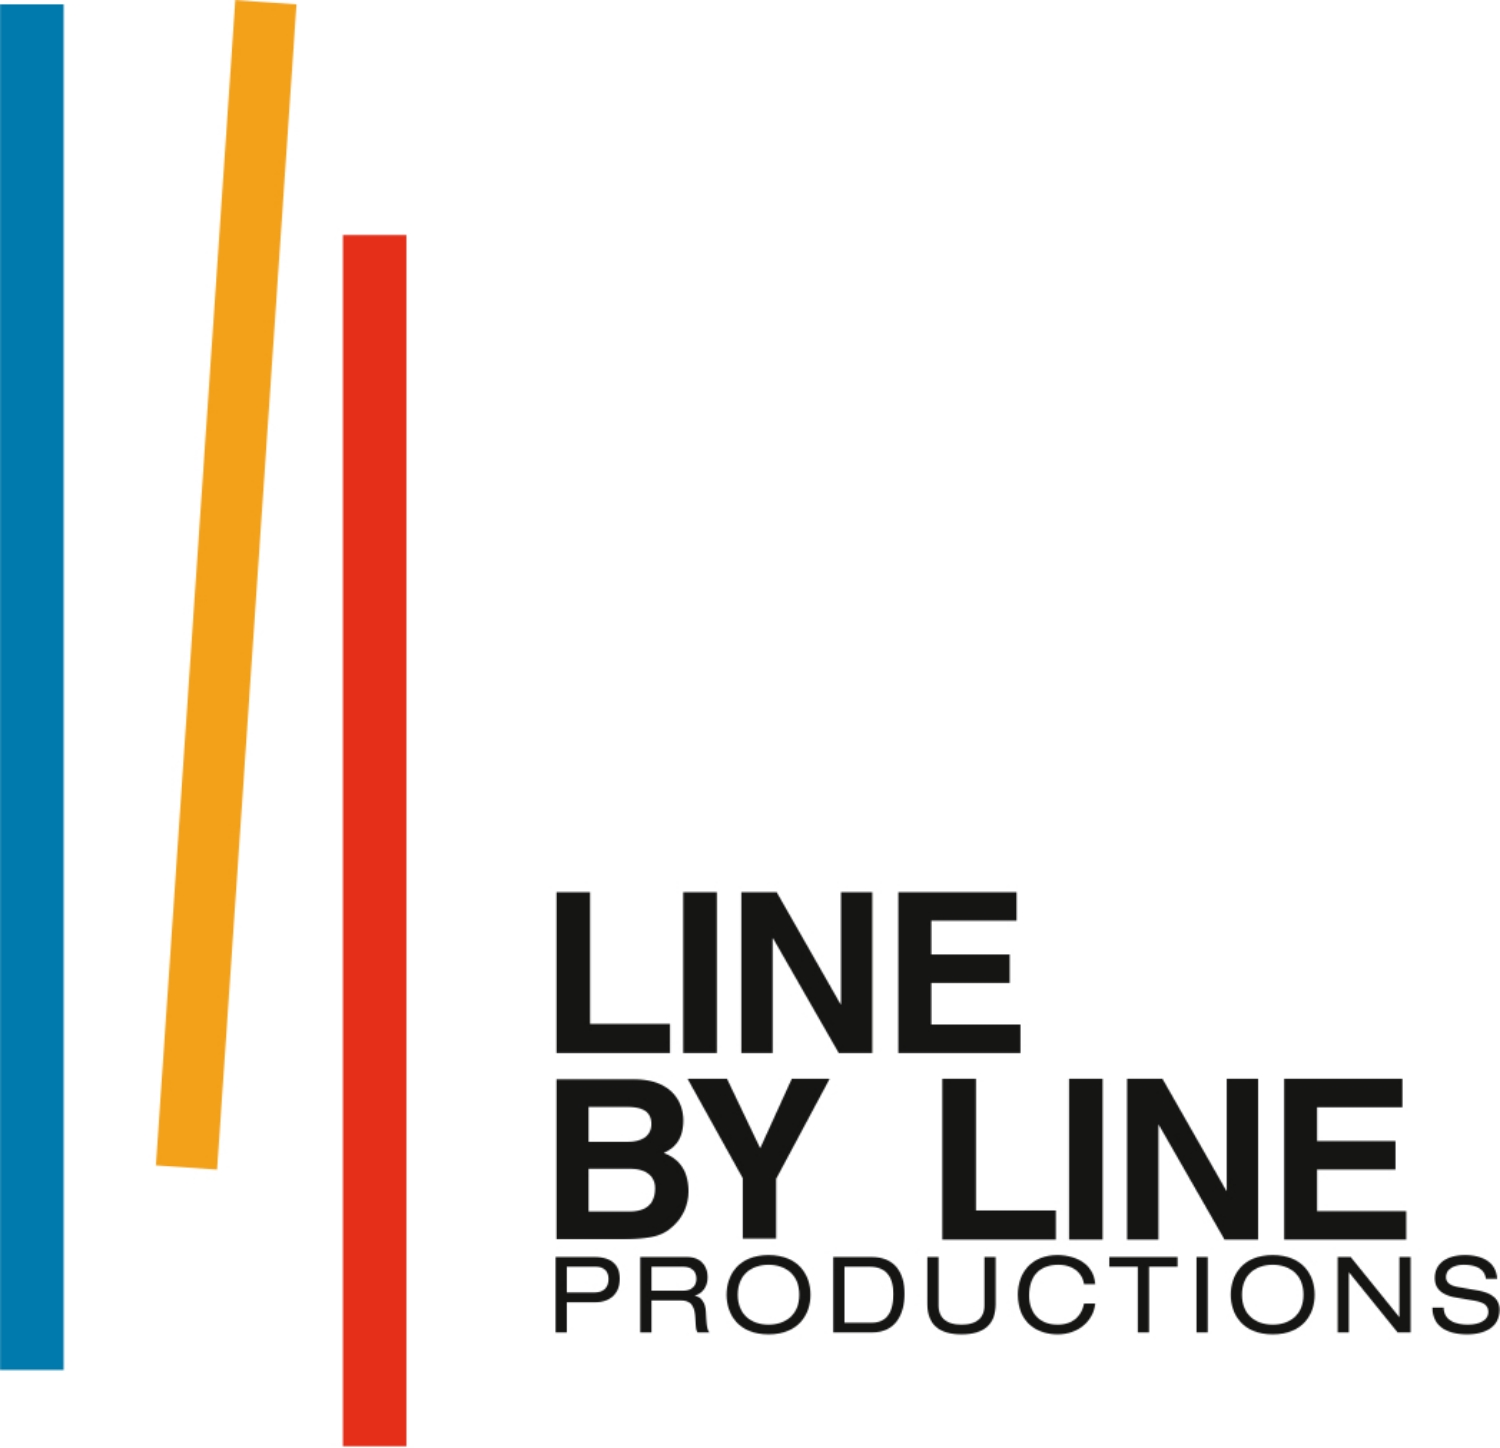 Line By Line Productions